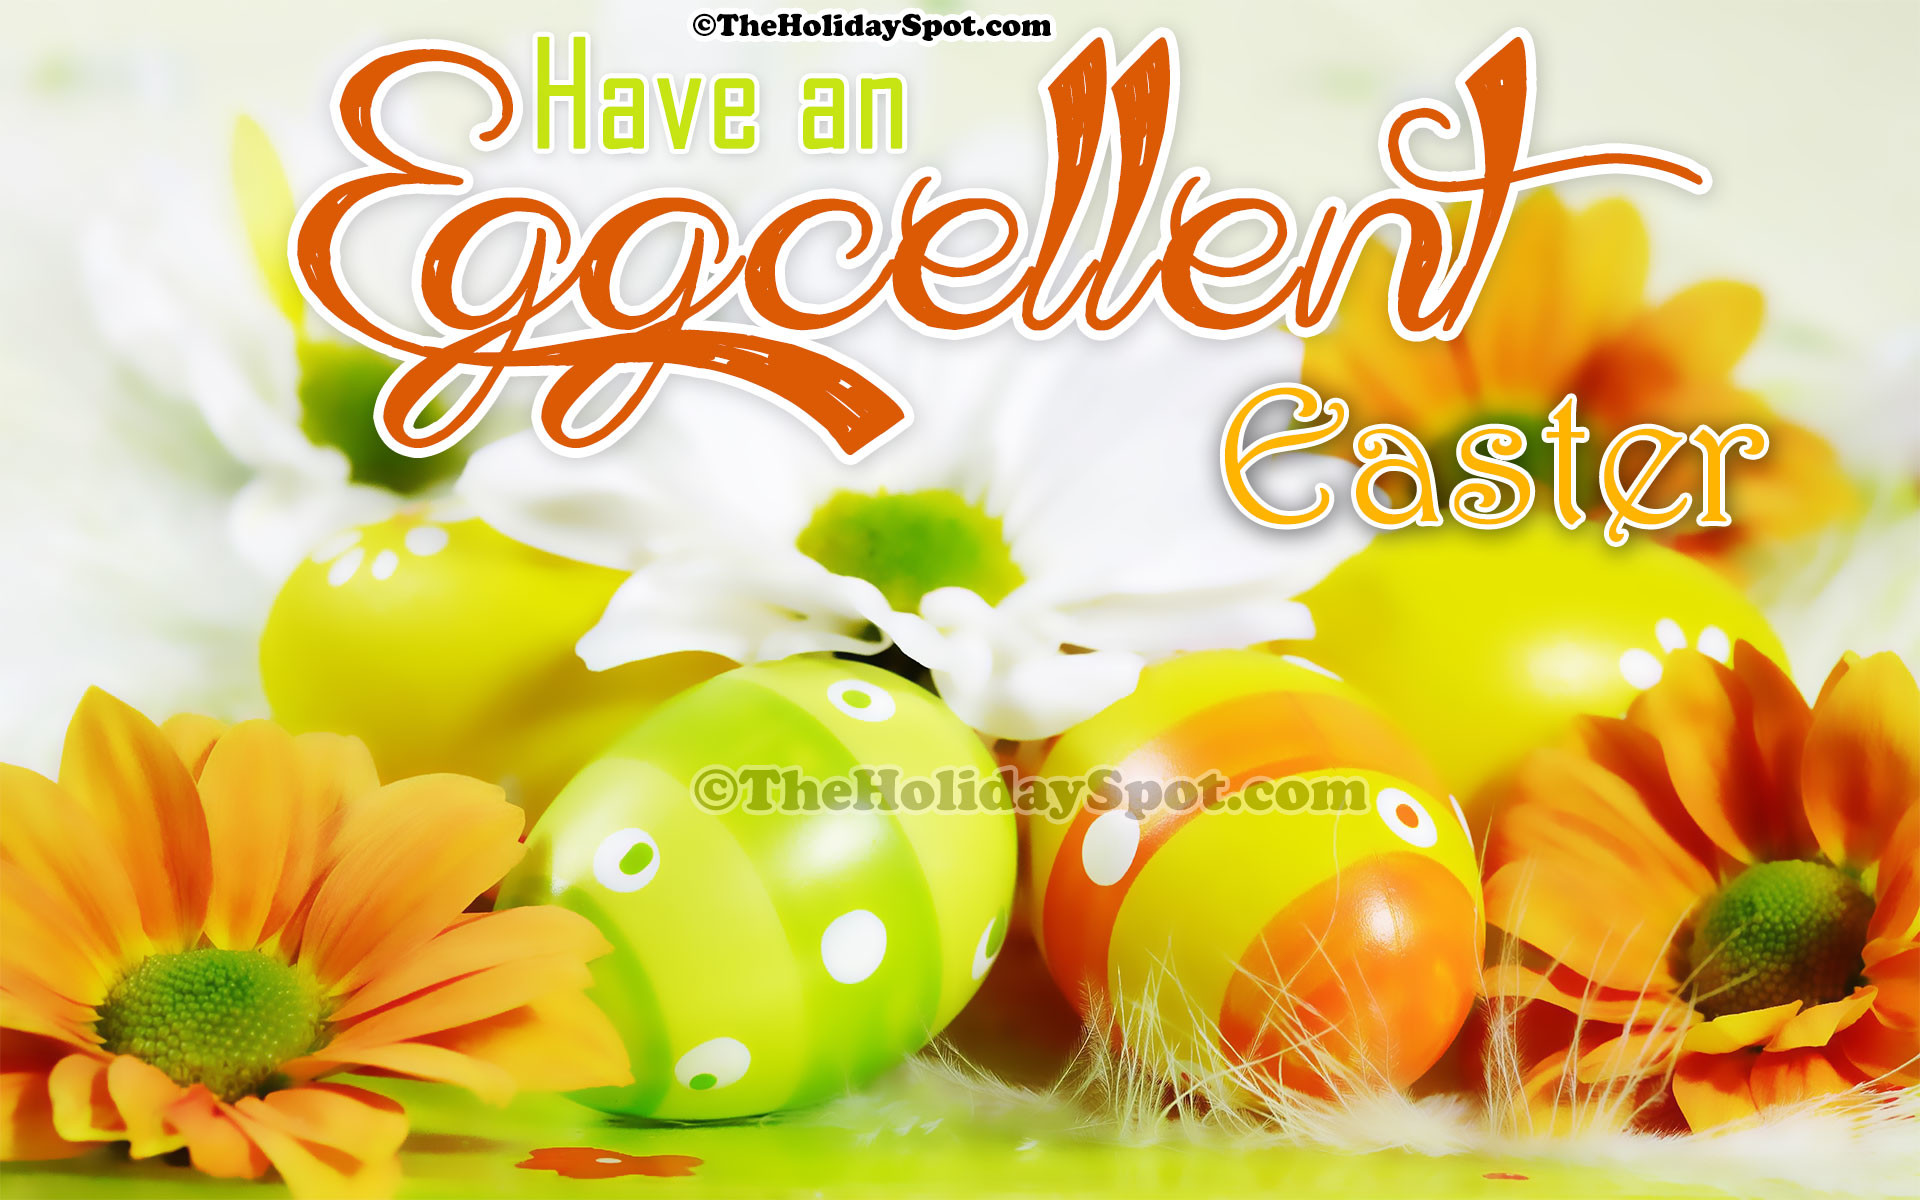 1920x1200 Wallpaper of Eggcellent Easter wishes